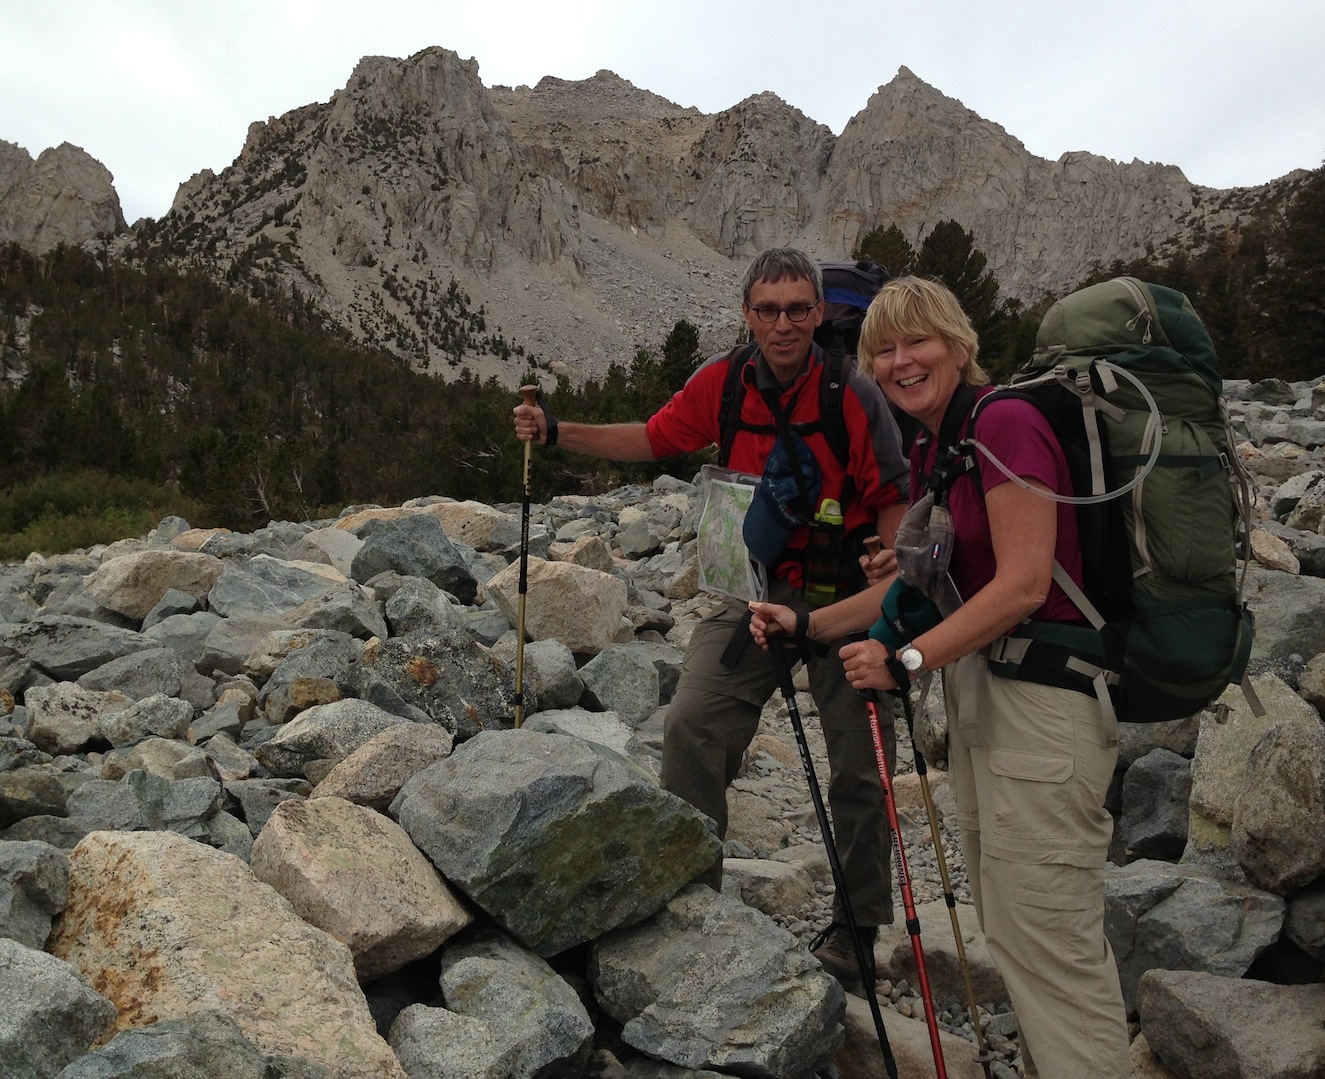 Globe-trotting hikers Annegien and Geert-jan from Amsterdam (!!) on the boulder field on the way to Kearsarge Pass on Aug. 31.